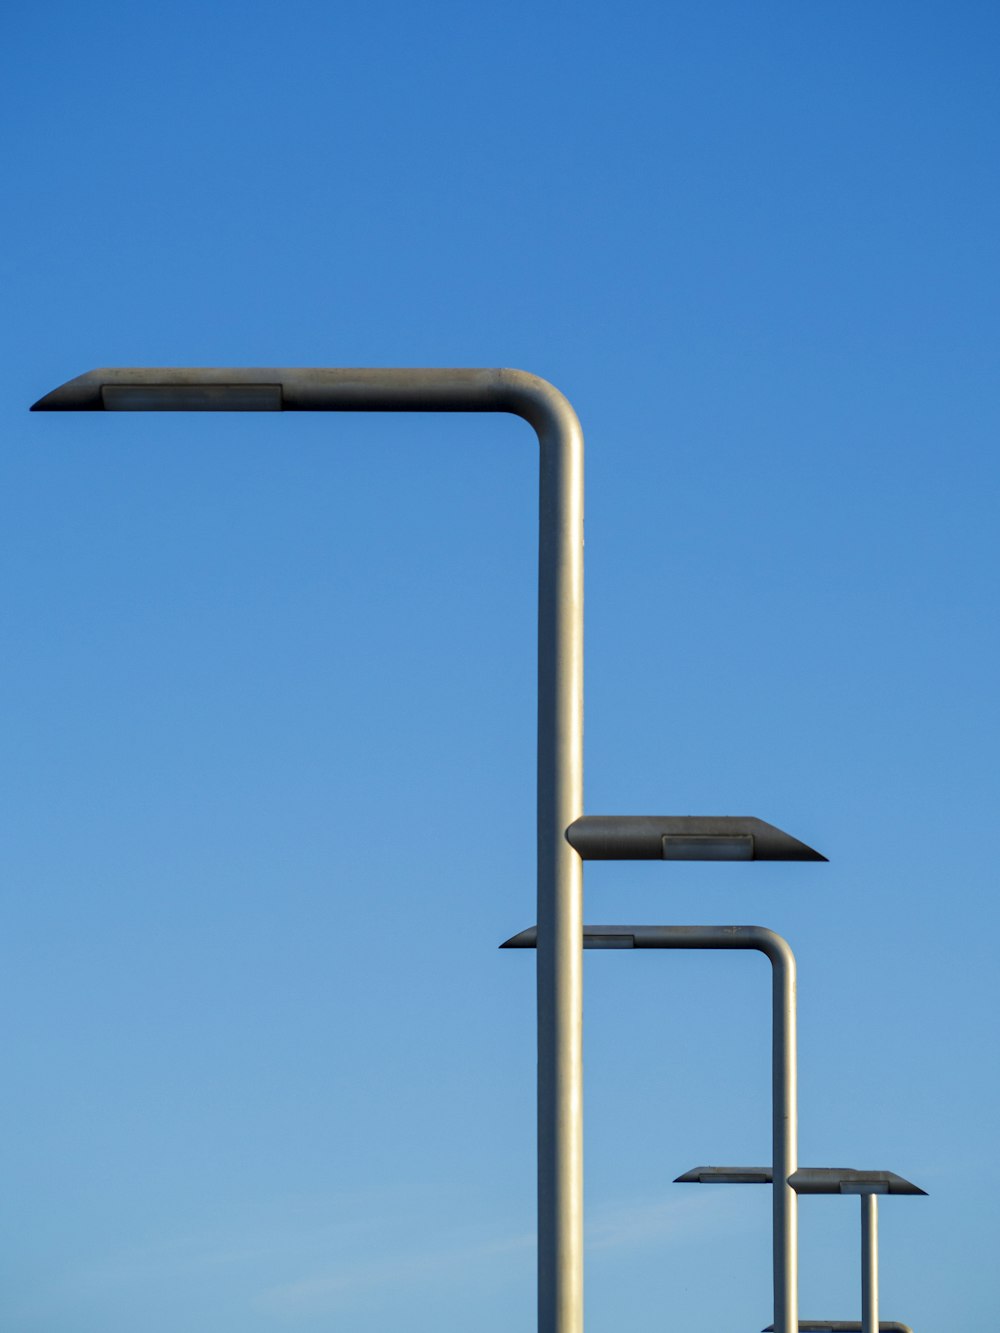 a group of metal poles against a blue sky